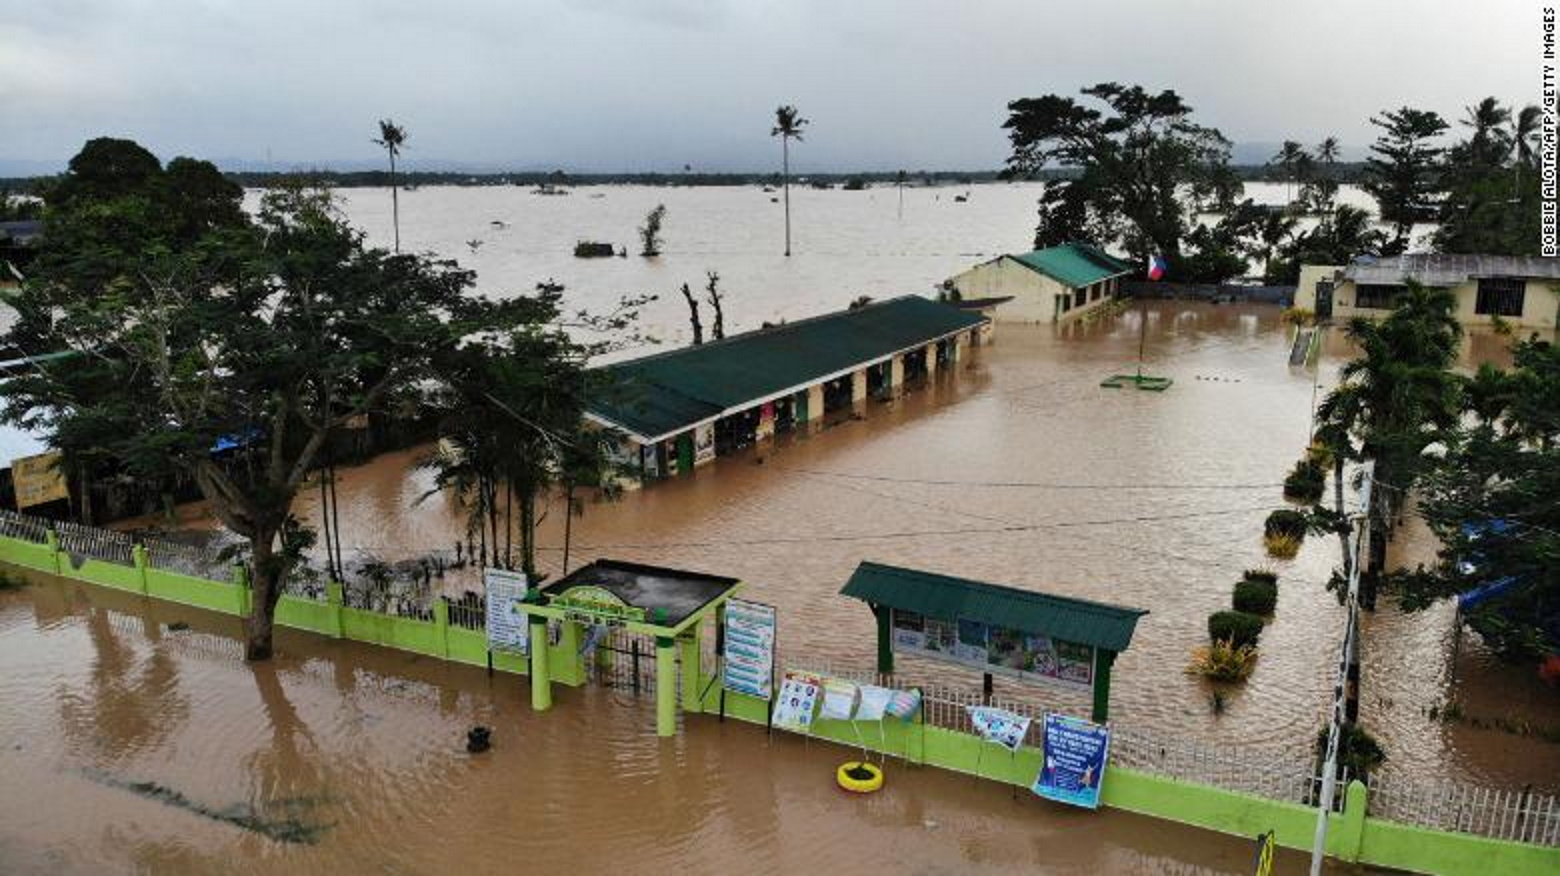 A school is submerged by floodwaters in Leyte province, southern Philippines, on 11 April 2022, following heavy rains brought by tropical storm Megi. Photo: Bobbie Alota / AFP / Getty Images